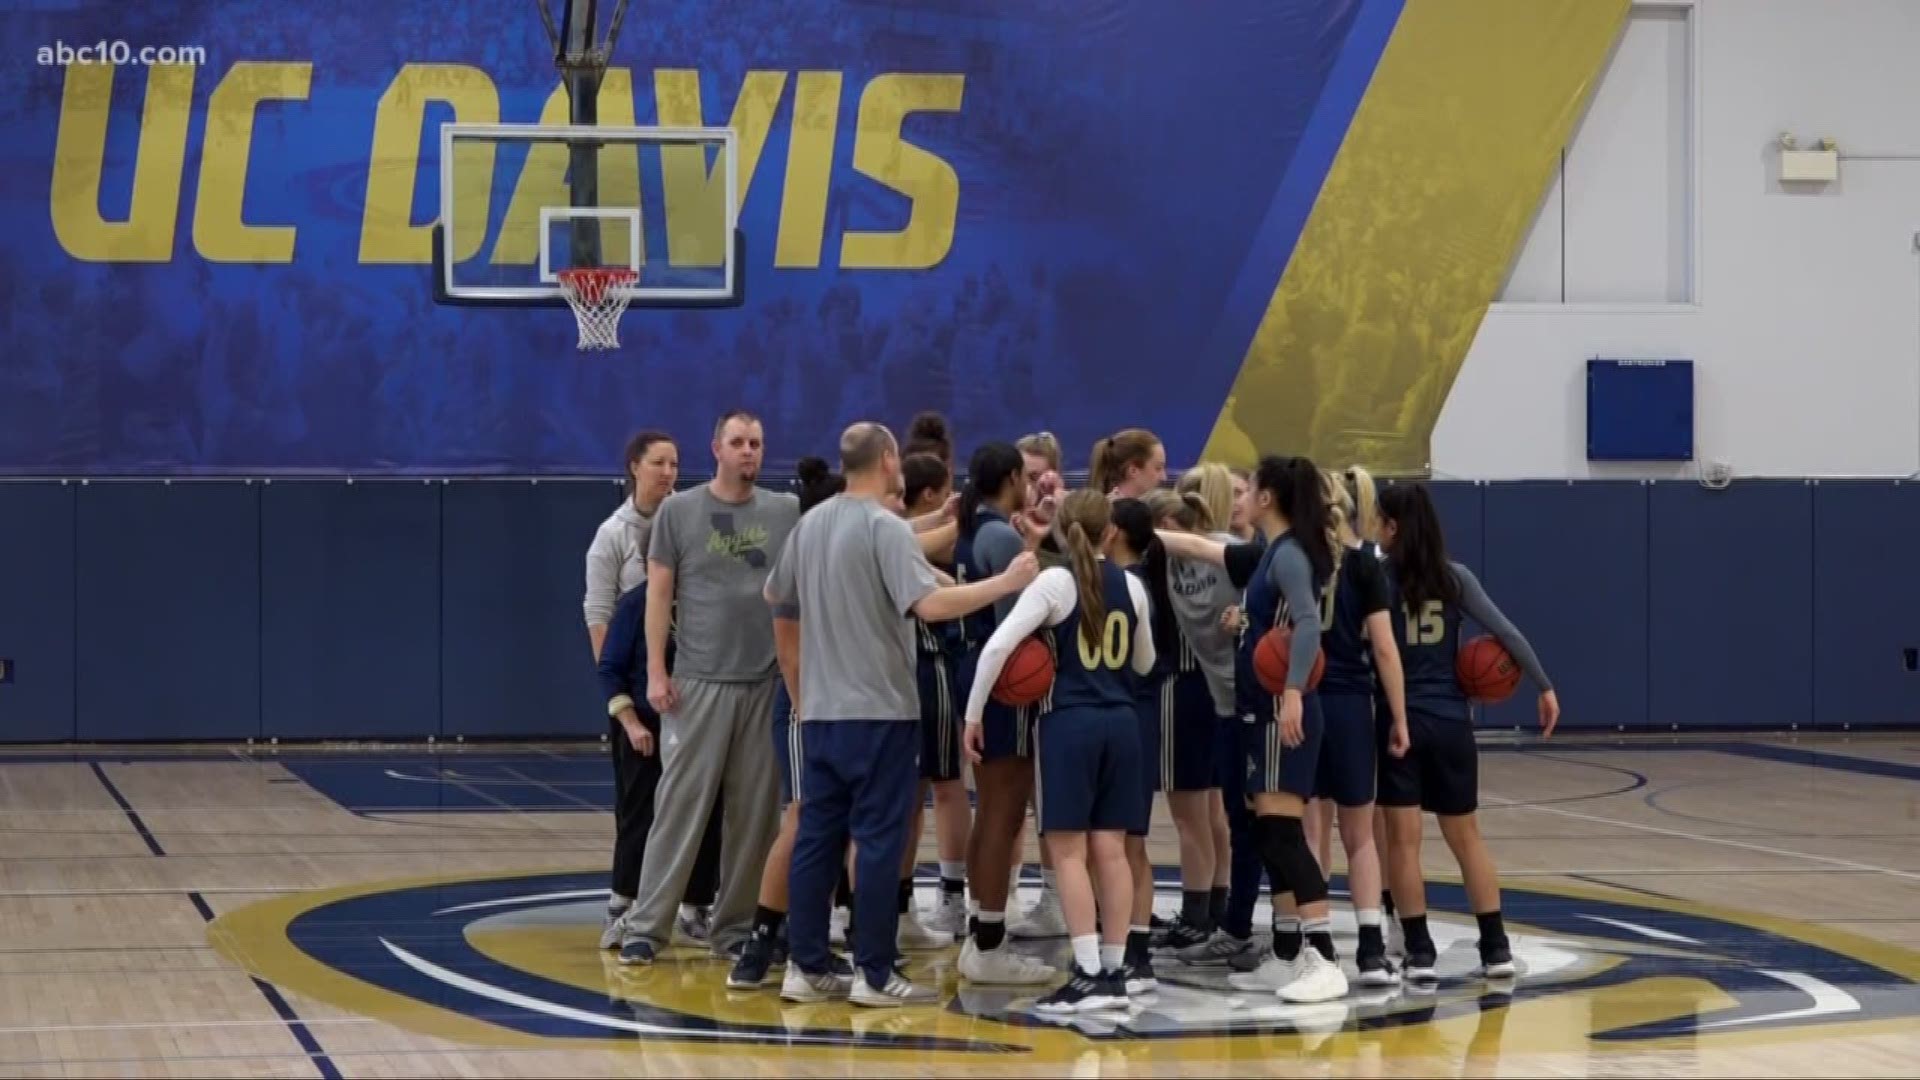 ABC10's Lina Washington features the UC Davis women's basketball team in this week's Sports Standout. Head Coach Jennifer Gross became only the second coach in league history to win three-straight coach of the year awards and the first since UC Santa Barbara's Mark French in 1996-98.